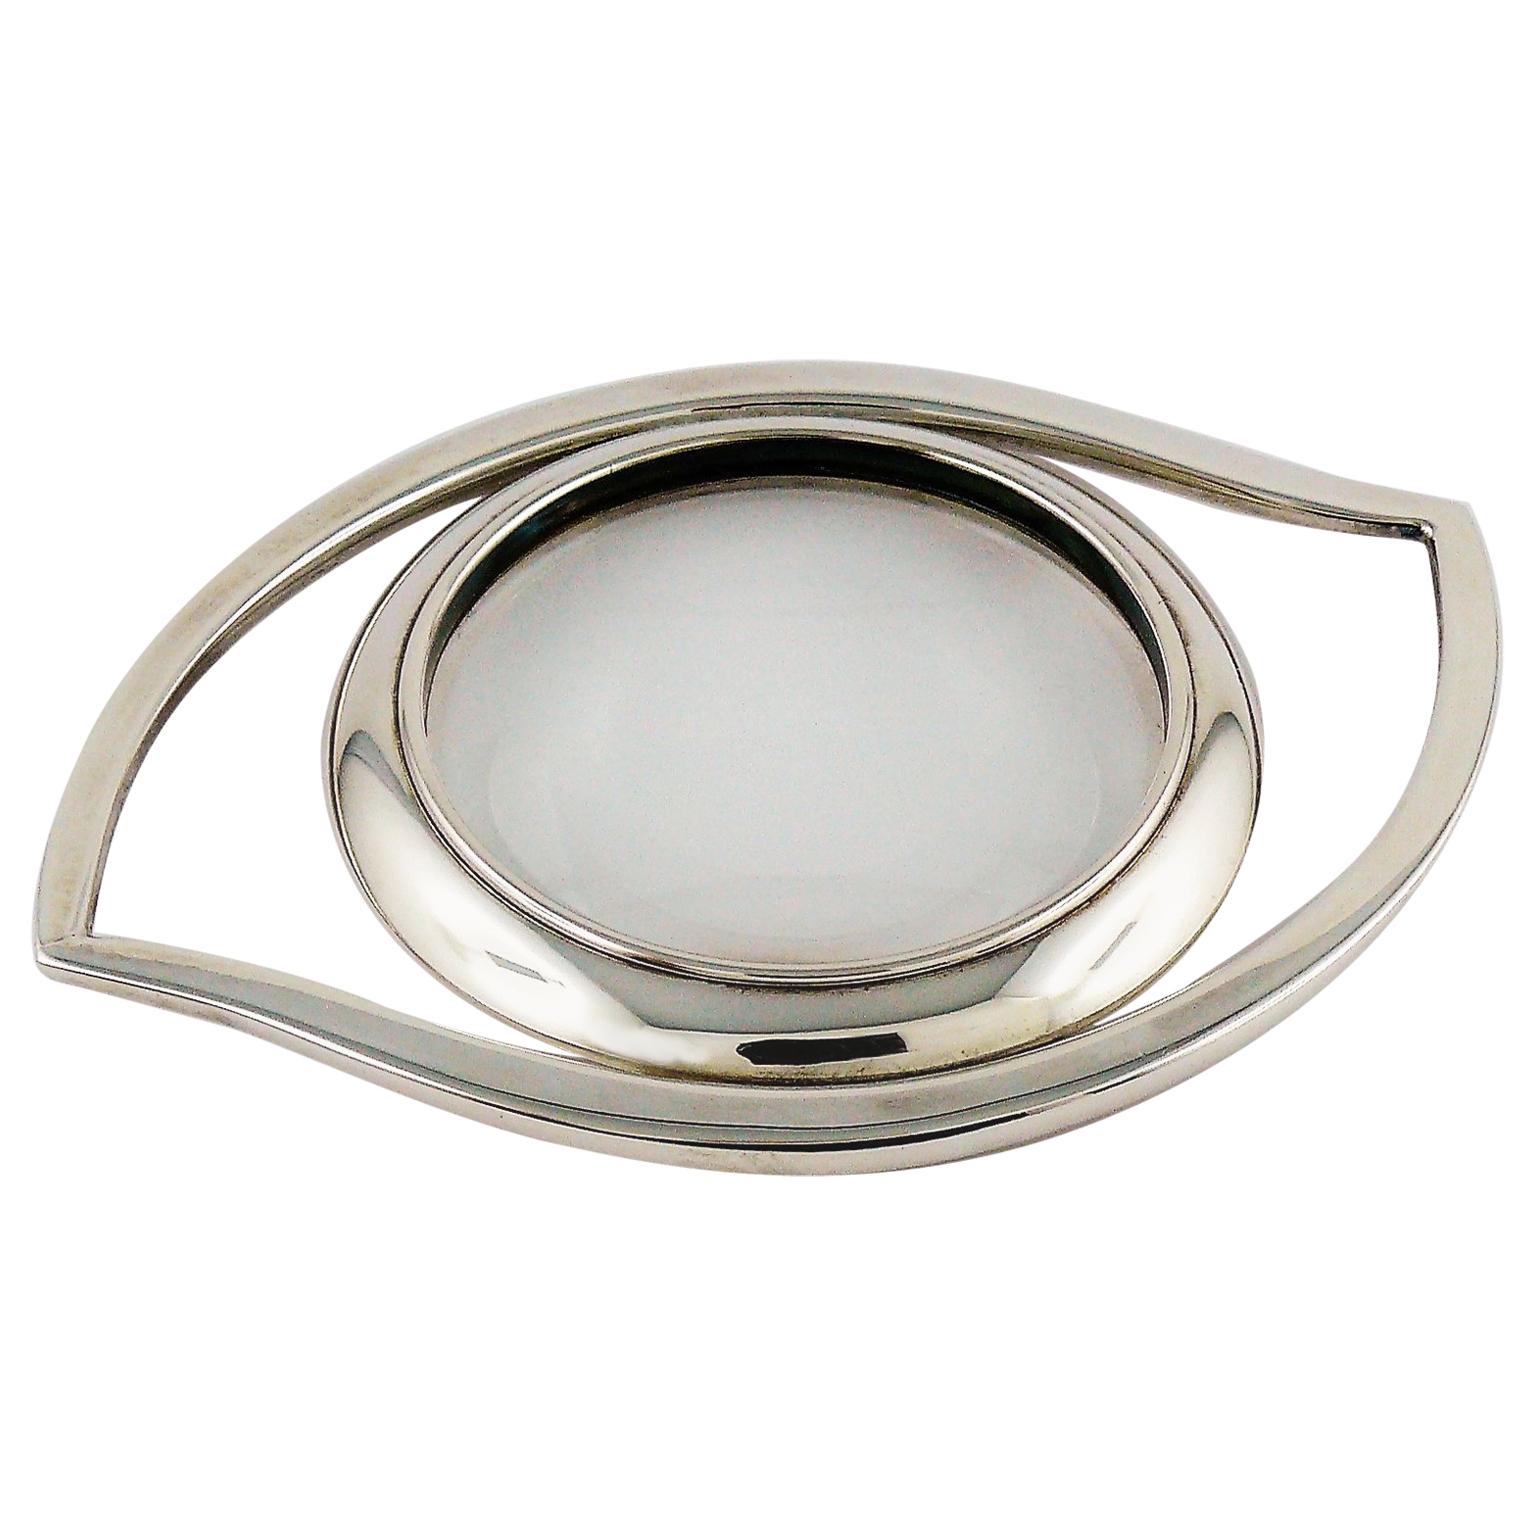 Hermes Cleopatra Eye Silver Toned Desk Magnifying Glass Paperweight